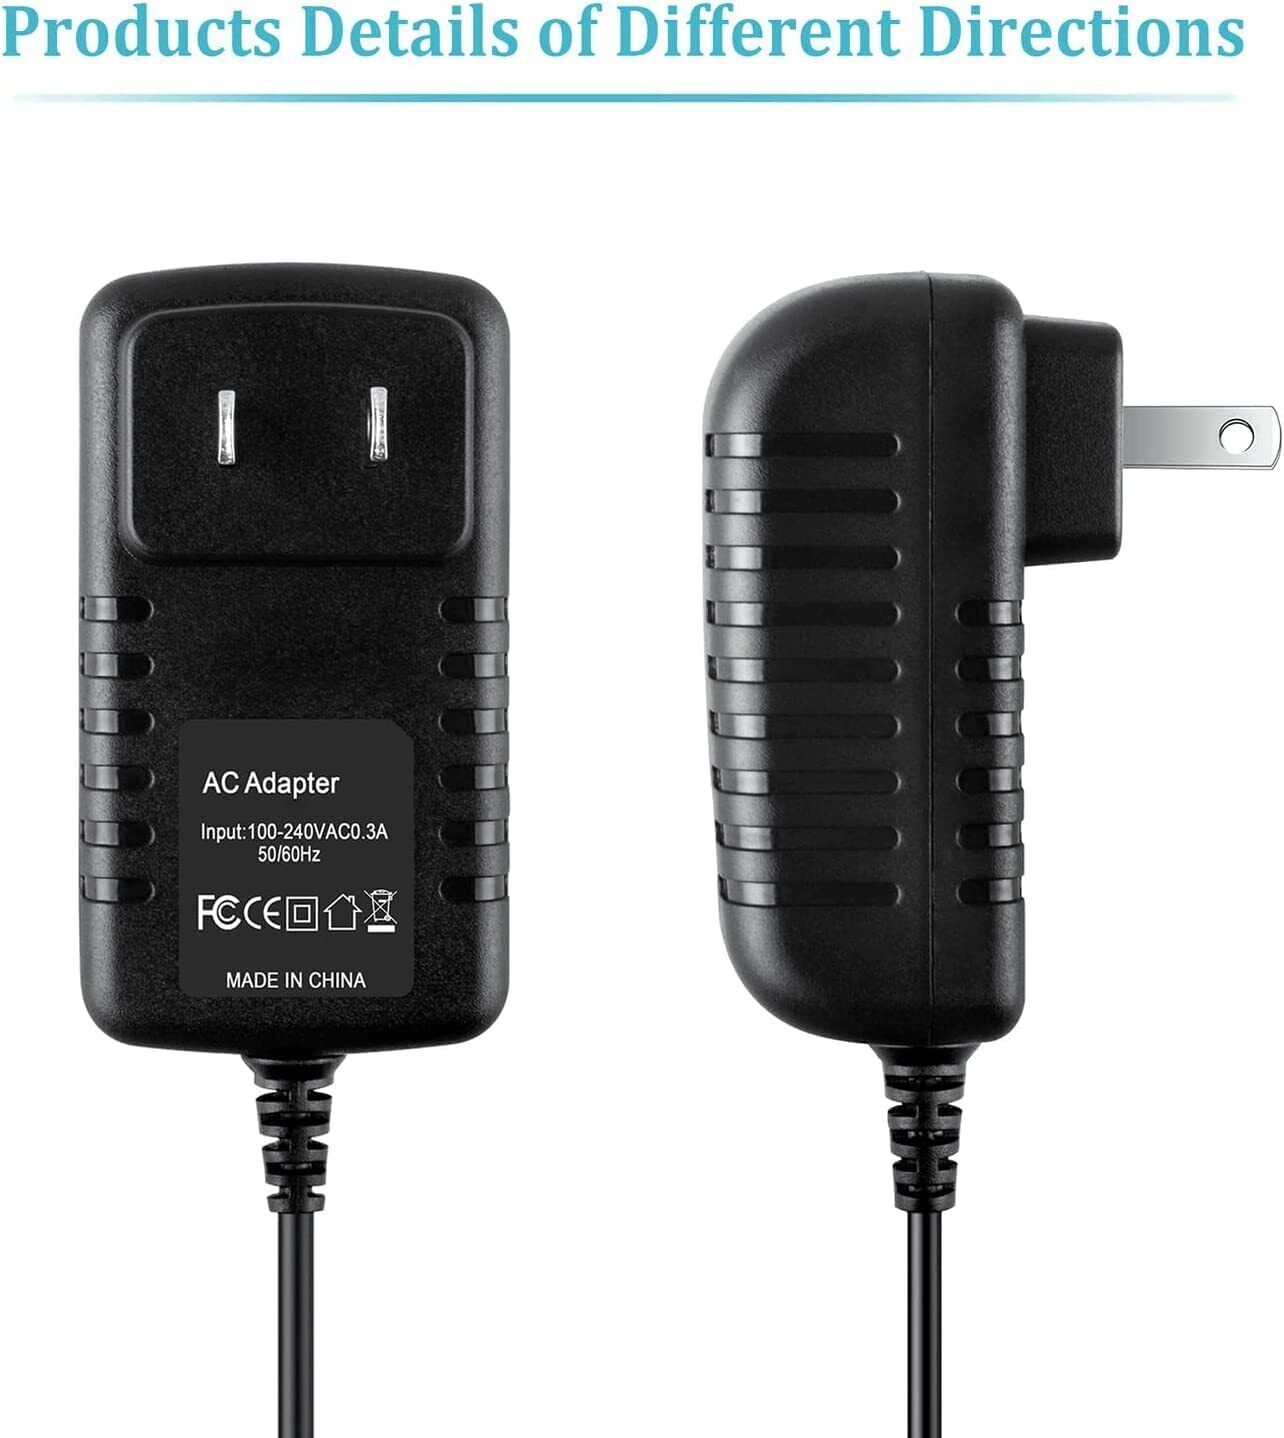 KPTEC ~ AC Adapter ~ k18s120150u 12V 1.5A AC adapter cord part Brand KPTEC Type Adapter Connection Split/Duplication 1